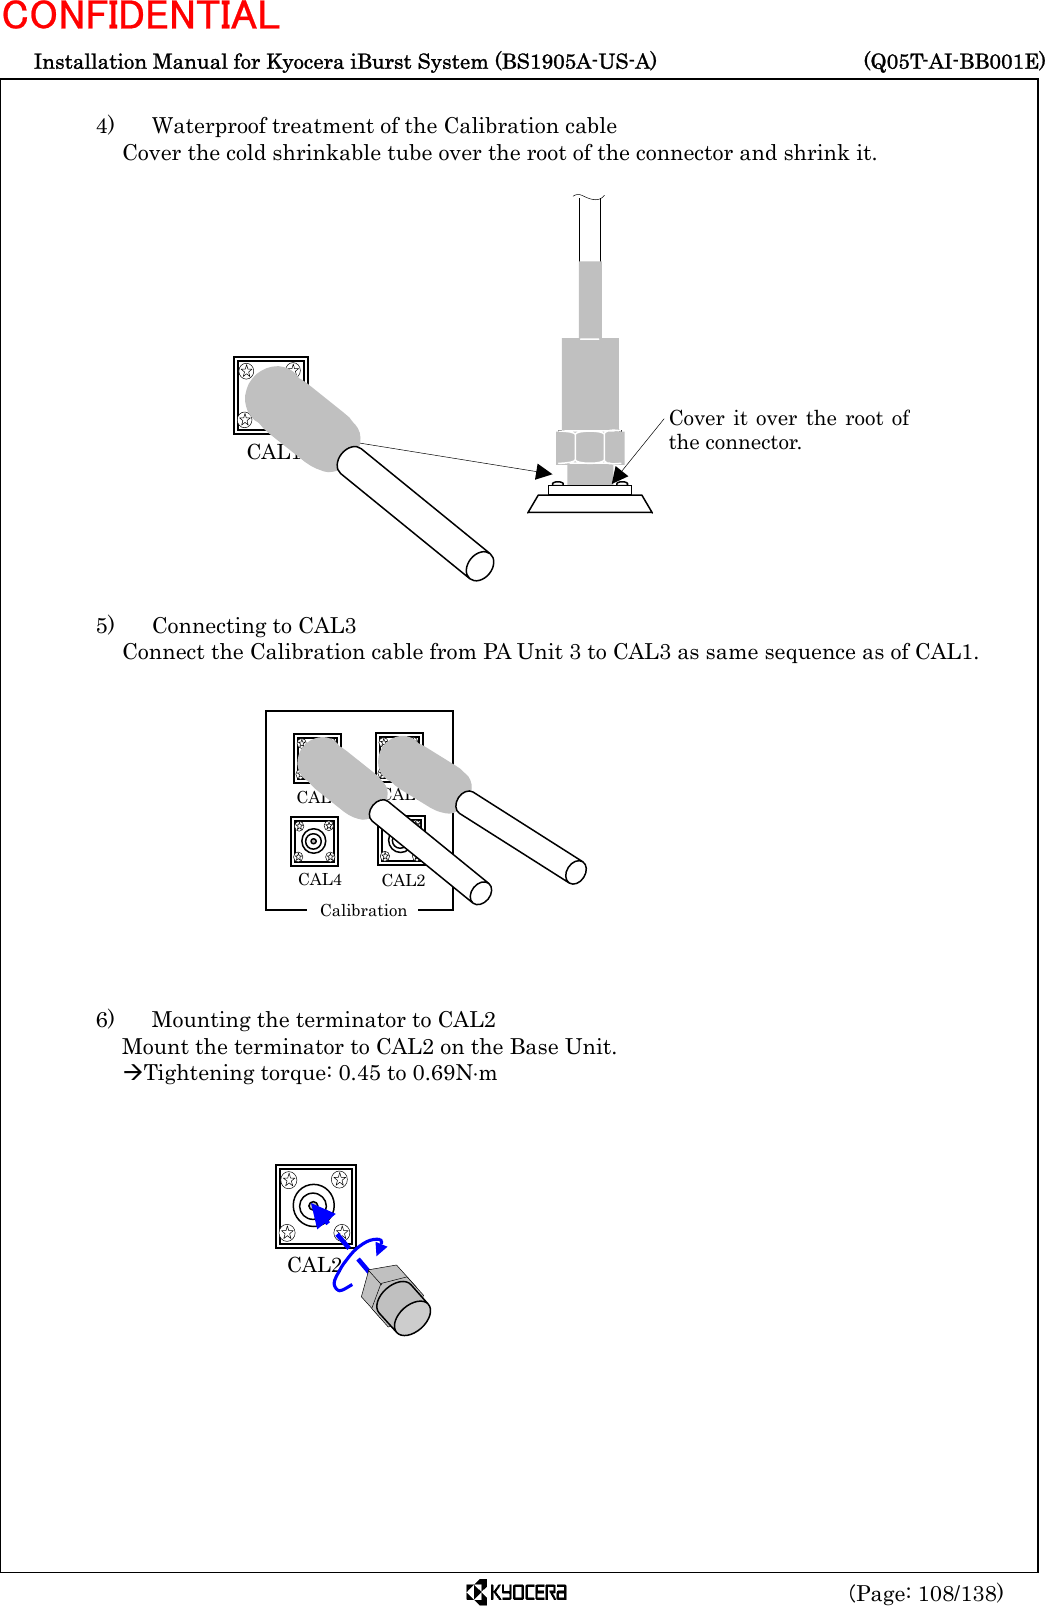  Installation Manual for Kyocera iBurst System (BS1905A-US-A)     (Q05T-AI-BB001E) (Page: 108/138) CONFIDENTIAL  4)    Waterproof treatment of the Calibration cable Cover the cold shrinkable tube over the root of the connector and shrink it.                  5)   Connecting to CAL3 Connect the Calibration cable from PA Unit 3 to CAL3 as same sequence as of CAL1.              6)    Mounting the terminator to CAL2 Mount the terminator to CAL2 on the Base Unit. ÆTightening torque: 0.45 to 0.69N⋅m           CAL2  CAL1 Cover it over the root ofthe connector.  CAL1CAL2  CAL3 CAL4   Calibration 